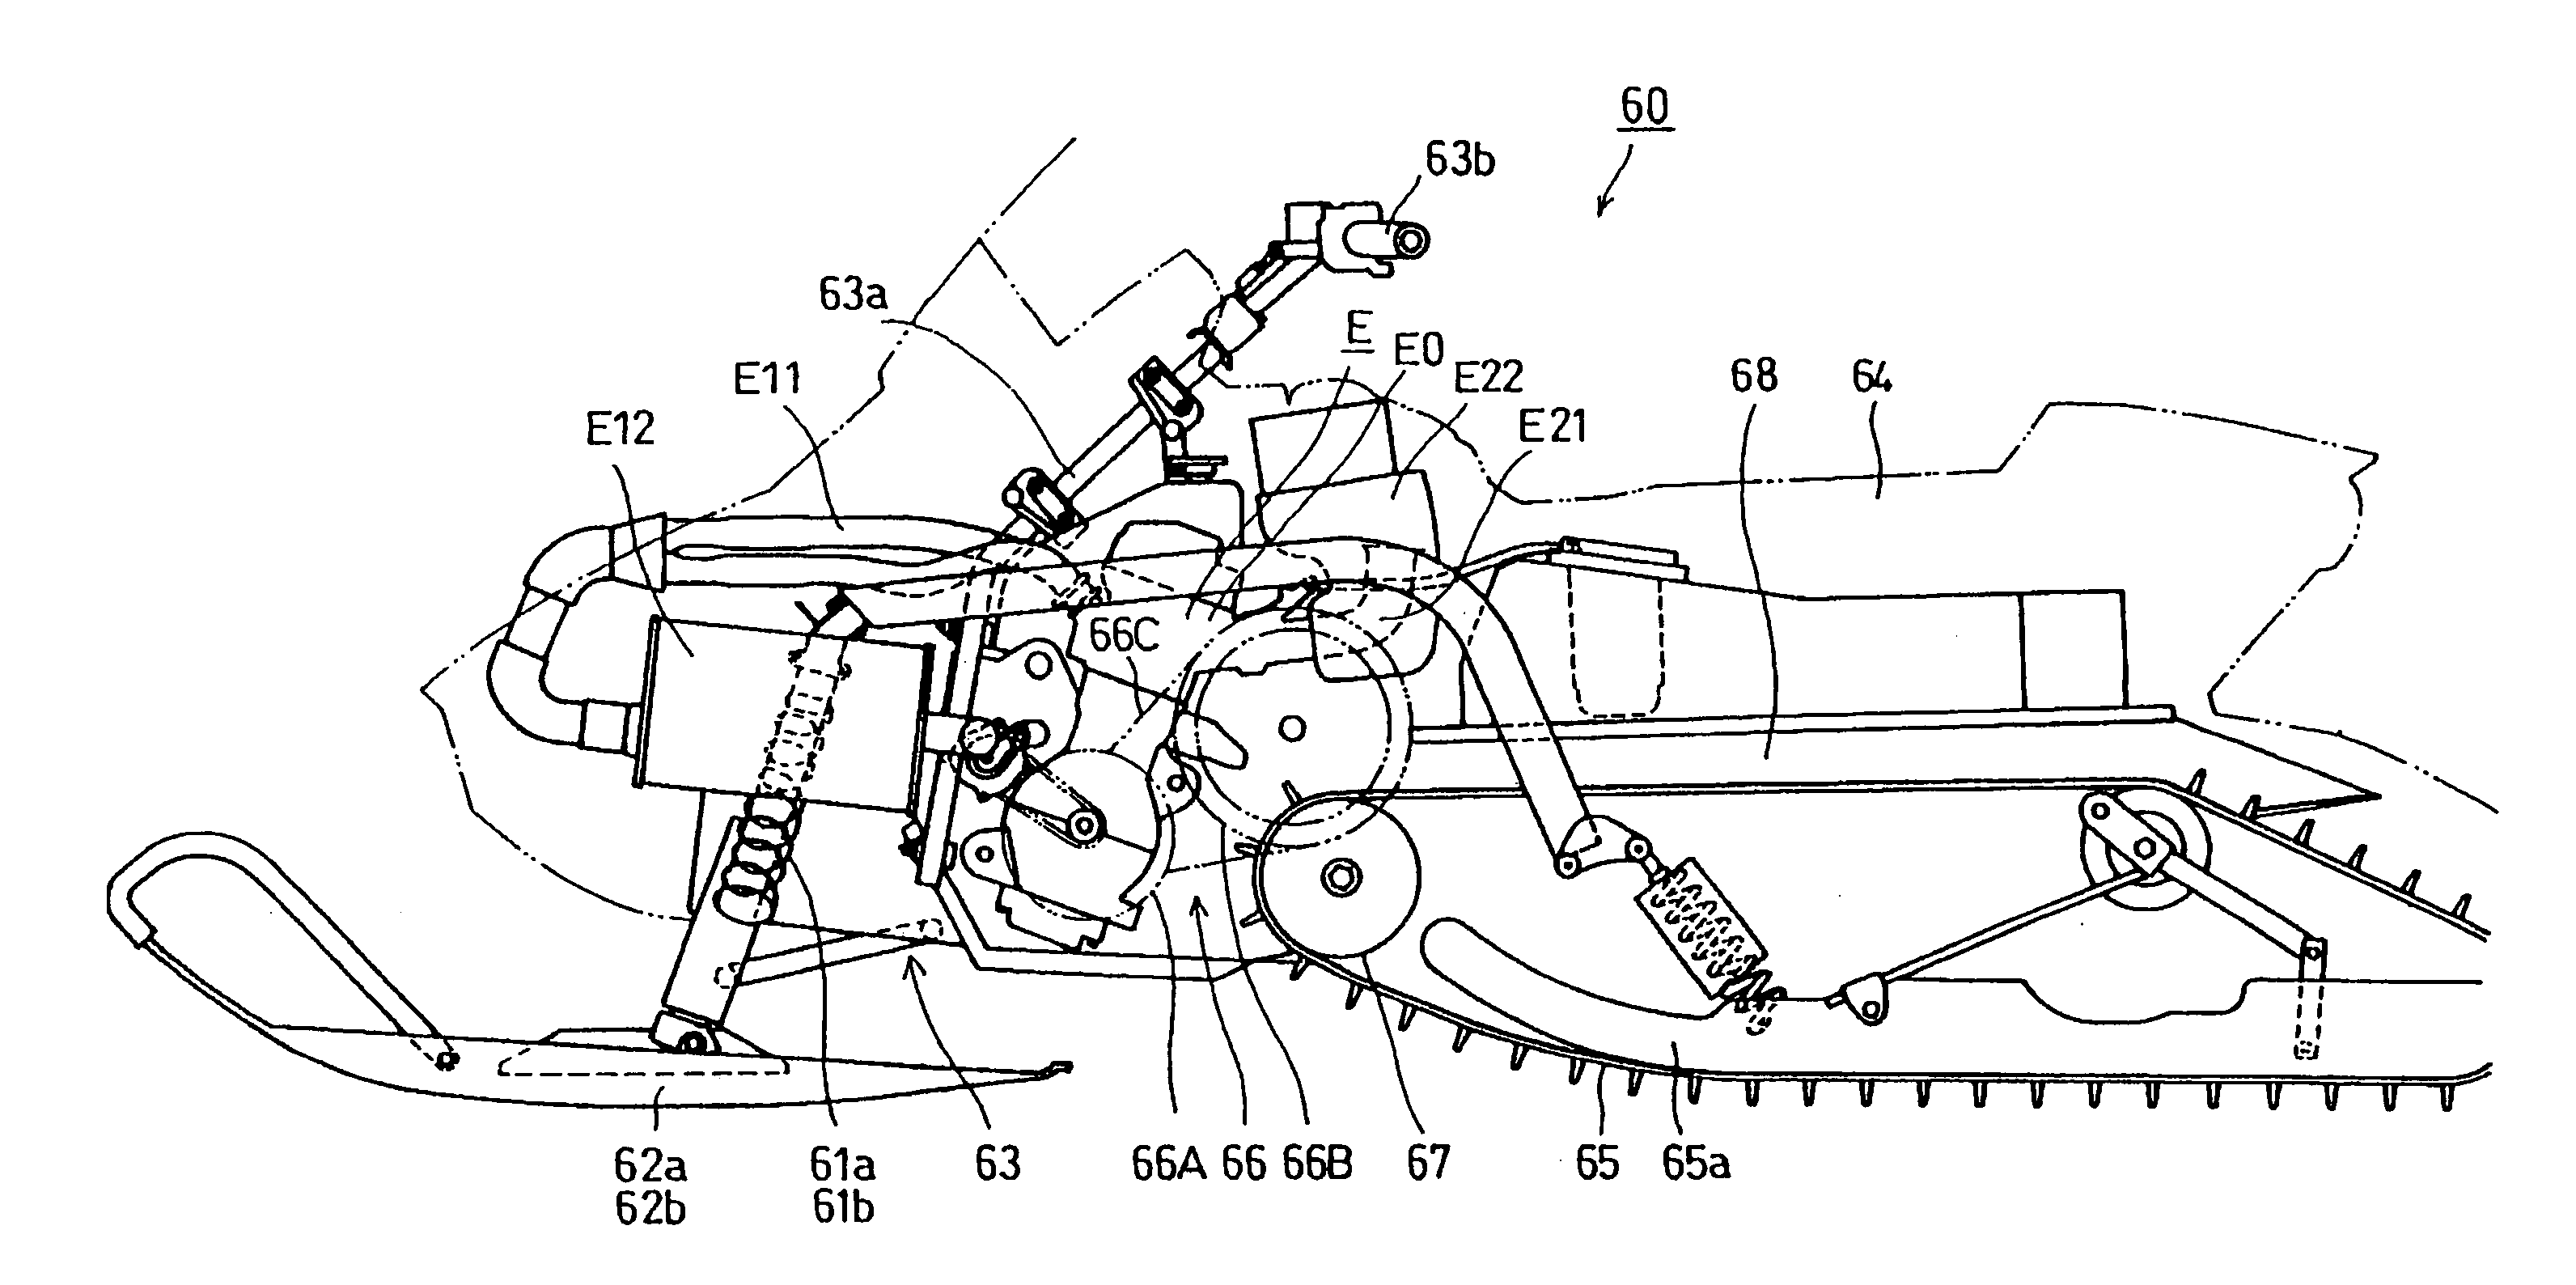 Valve train lubricating structure in internal combustion engine